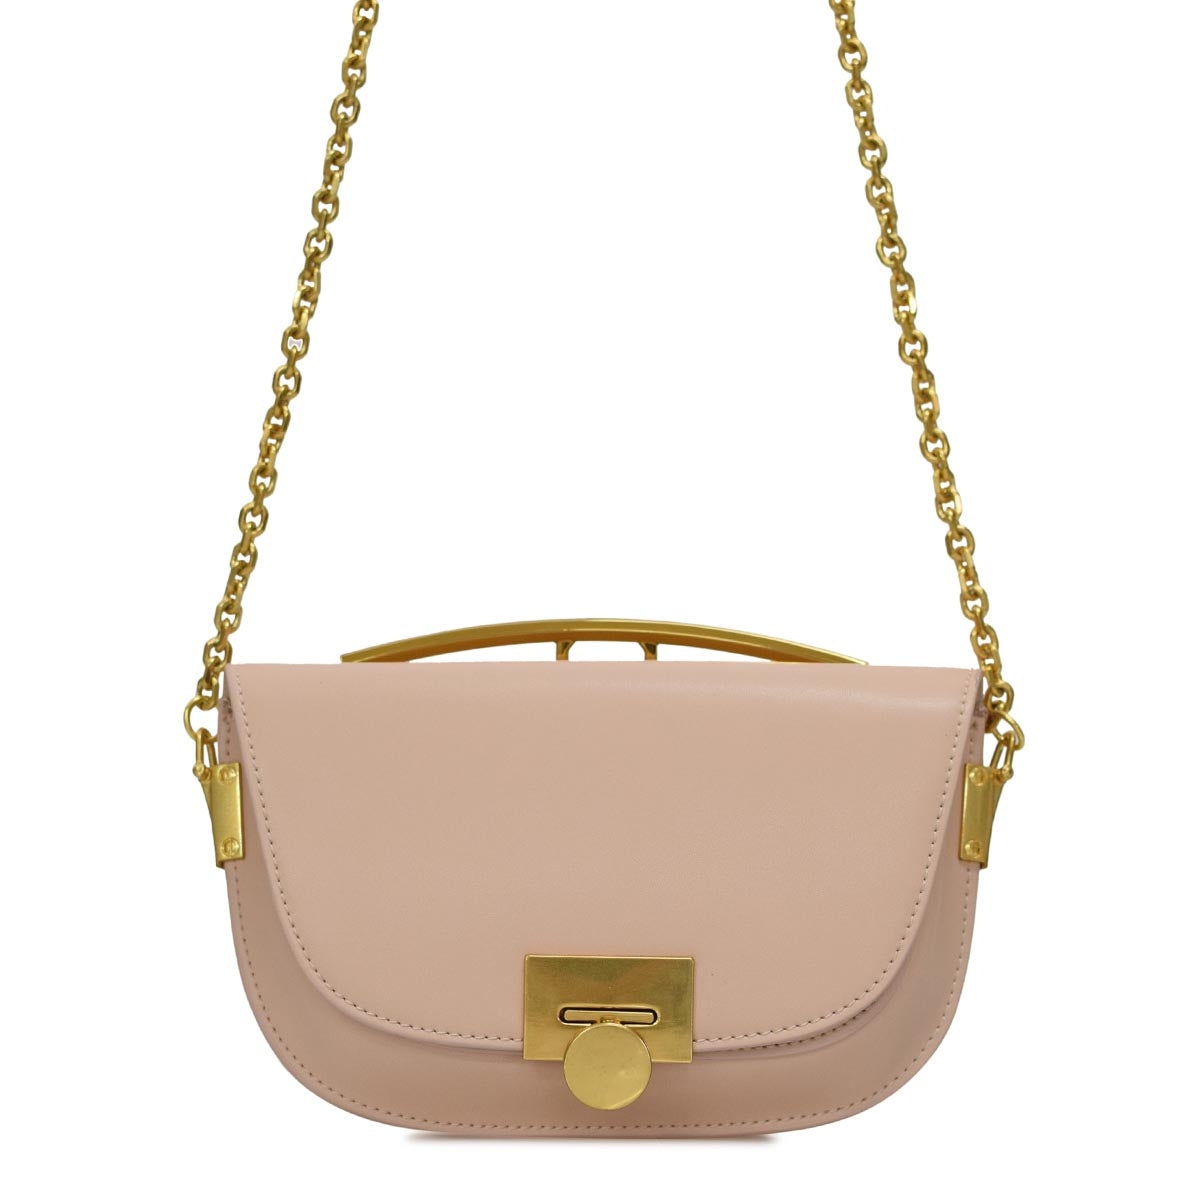 Leather Pochette with Metal Chain Shoulder Strap